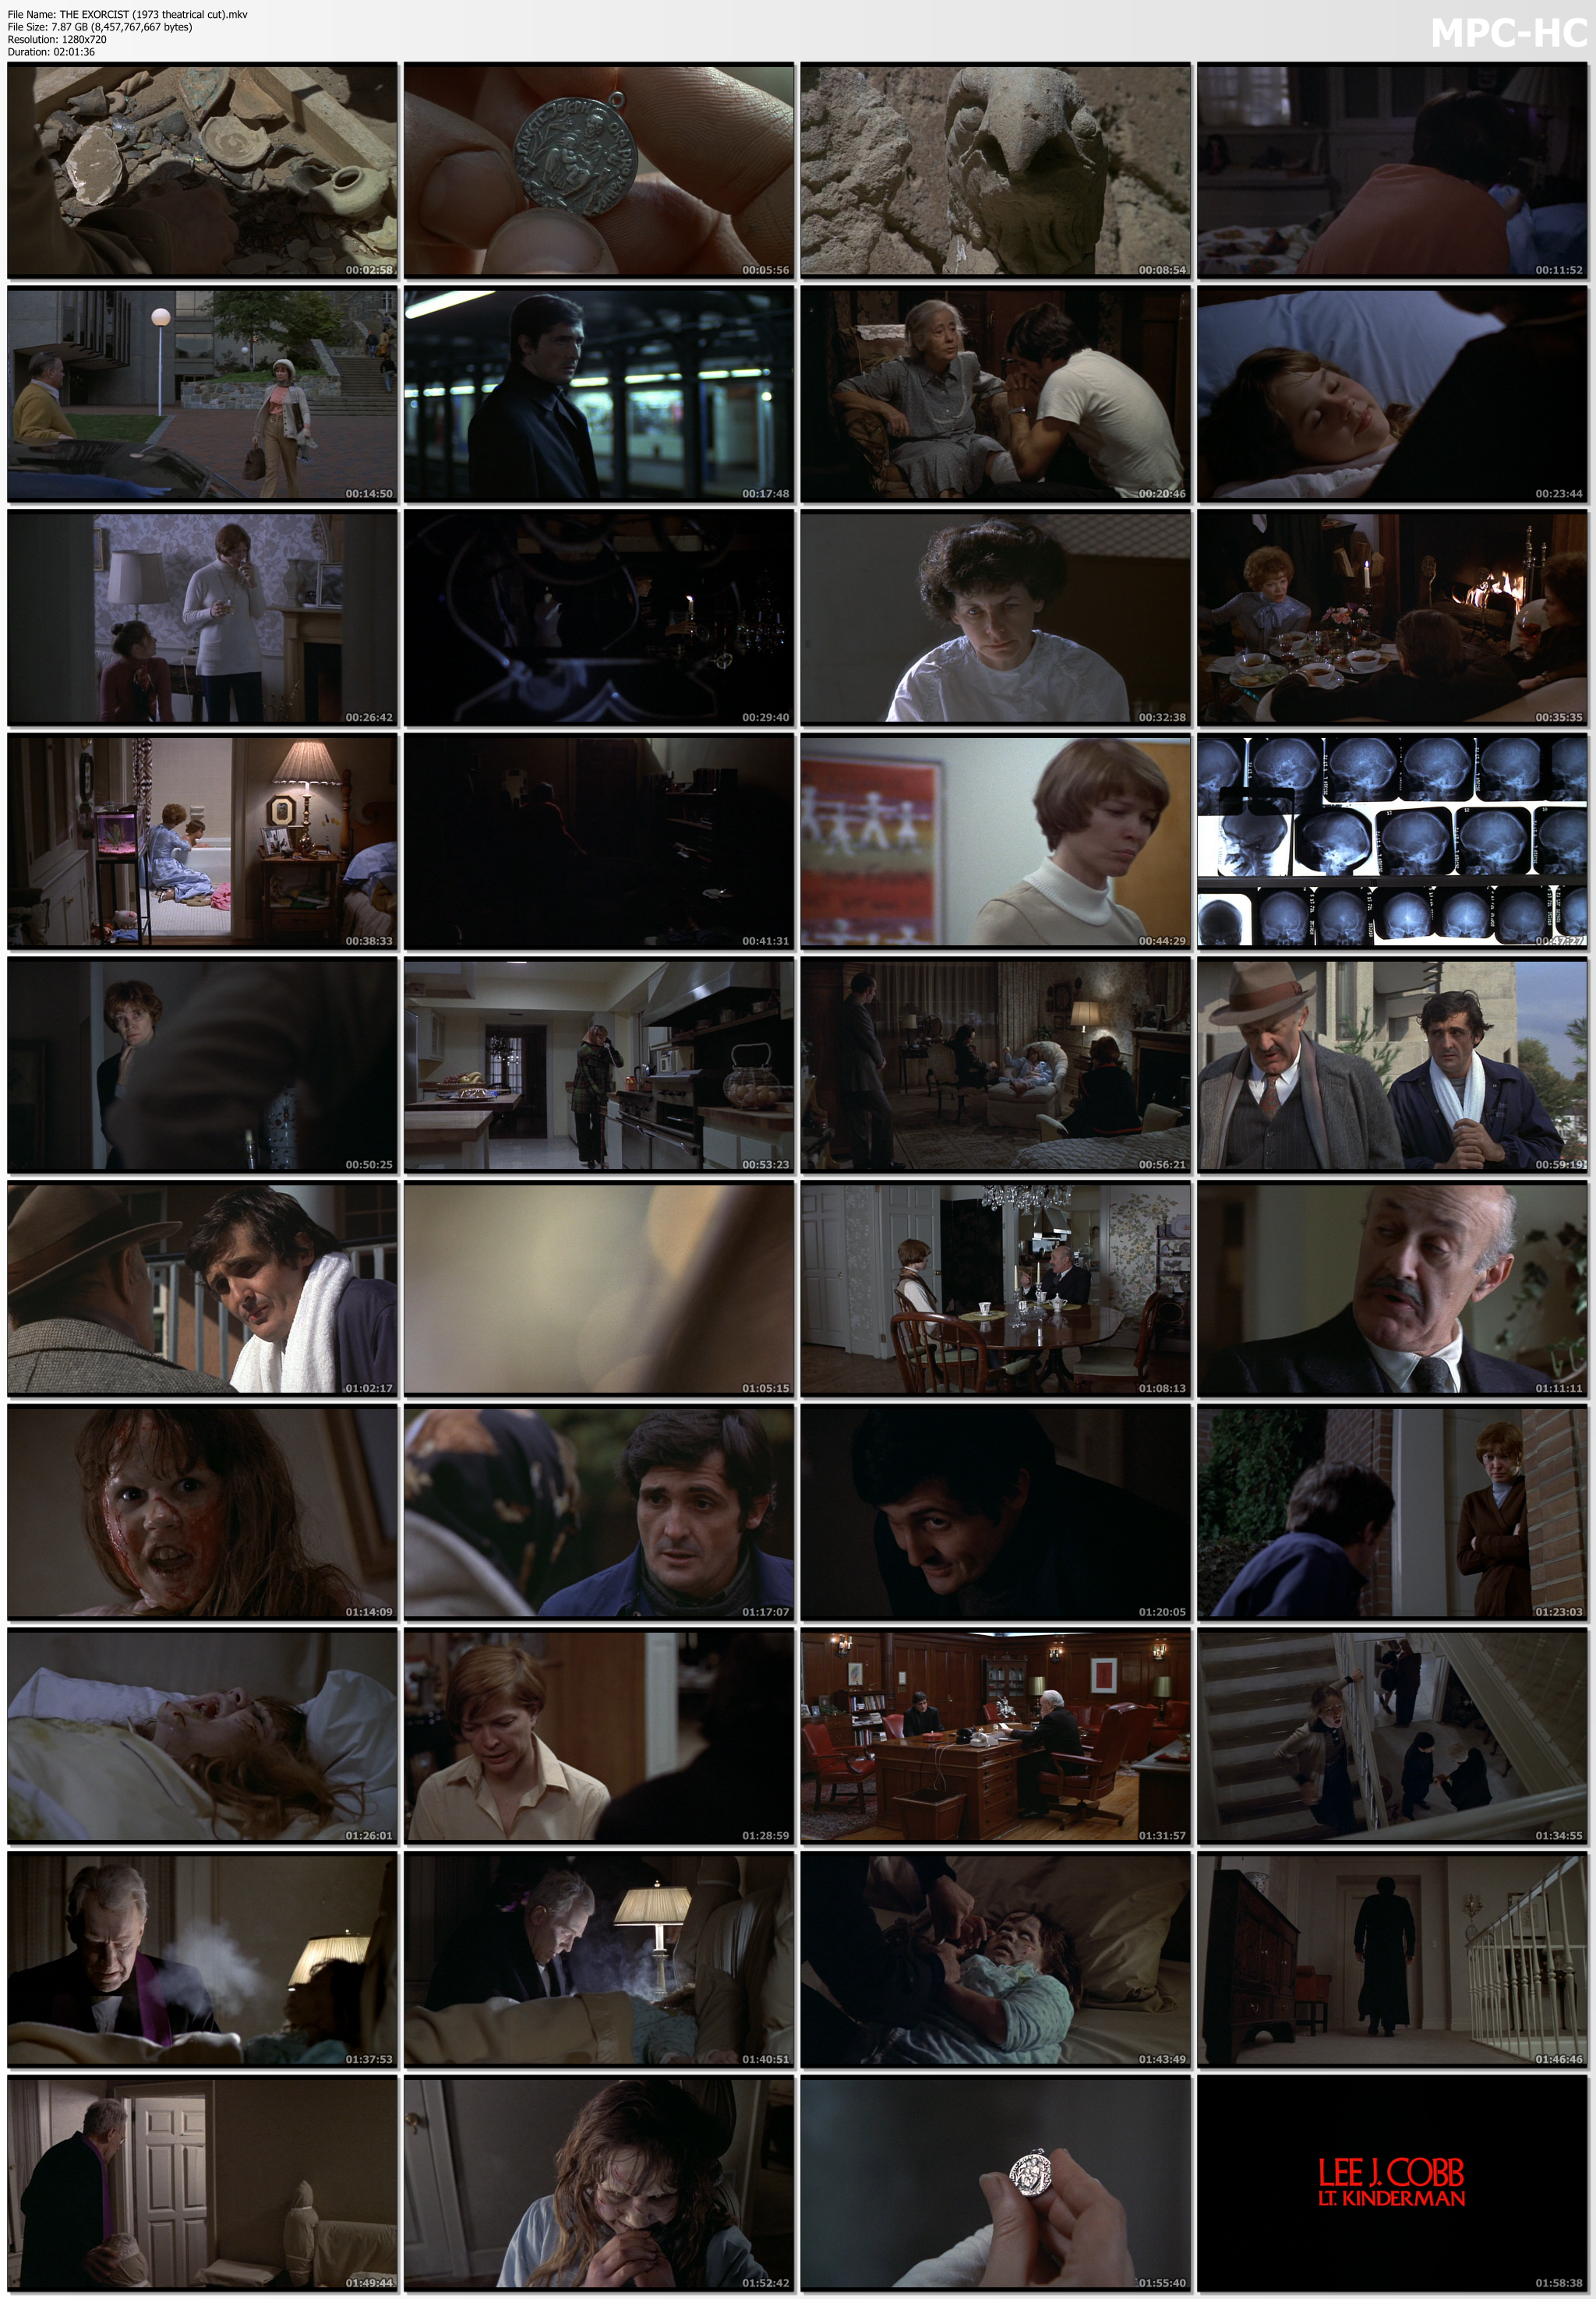 [Image: THE-EXORCIST-1973-theatrical-cut-mkv-thumbs.png]